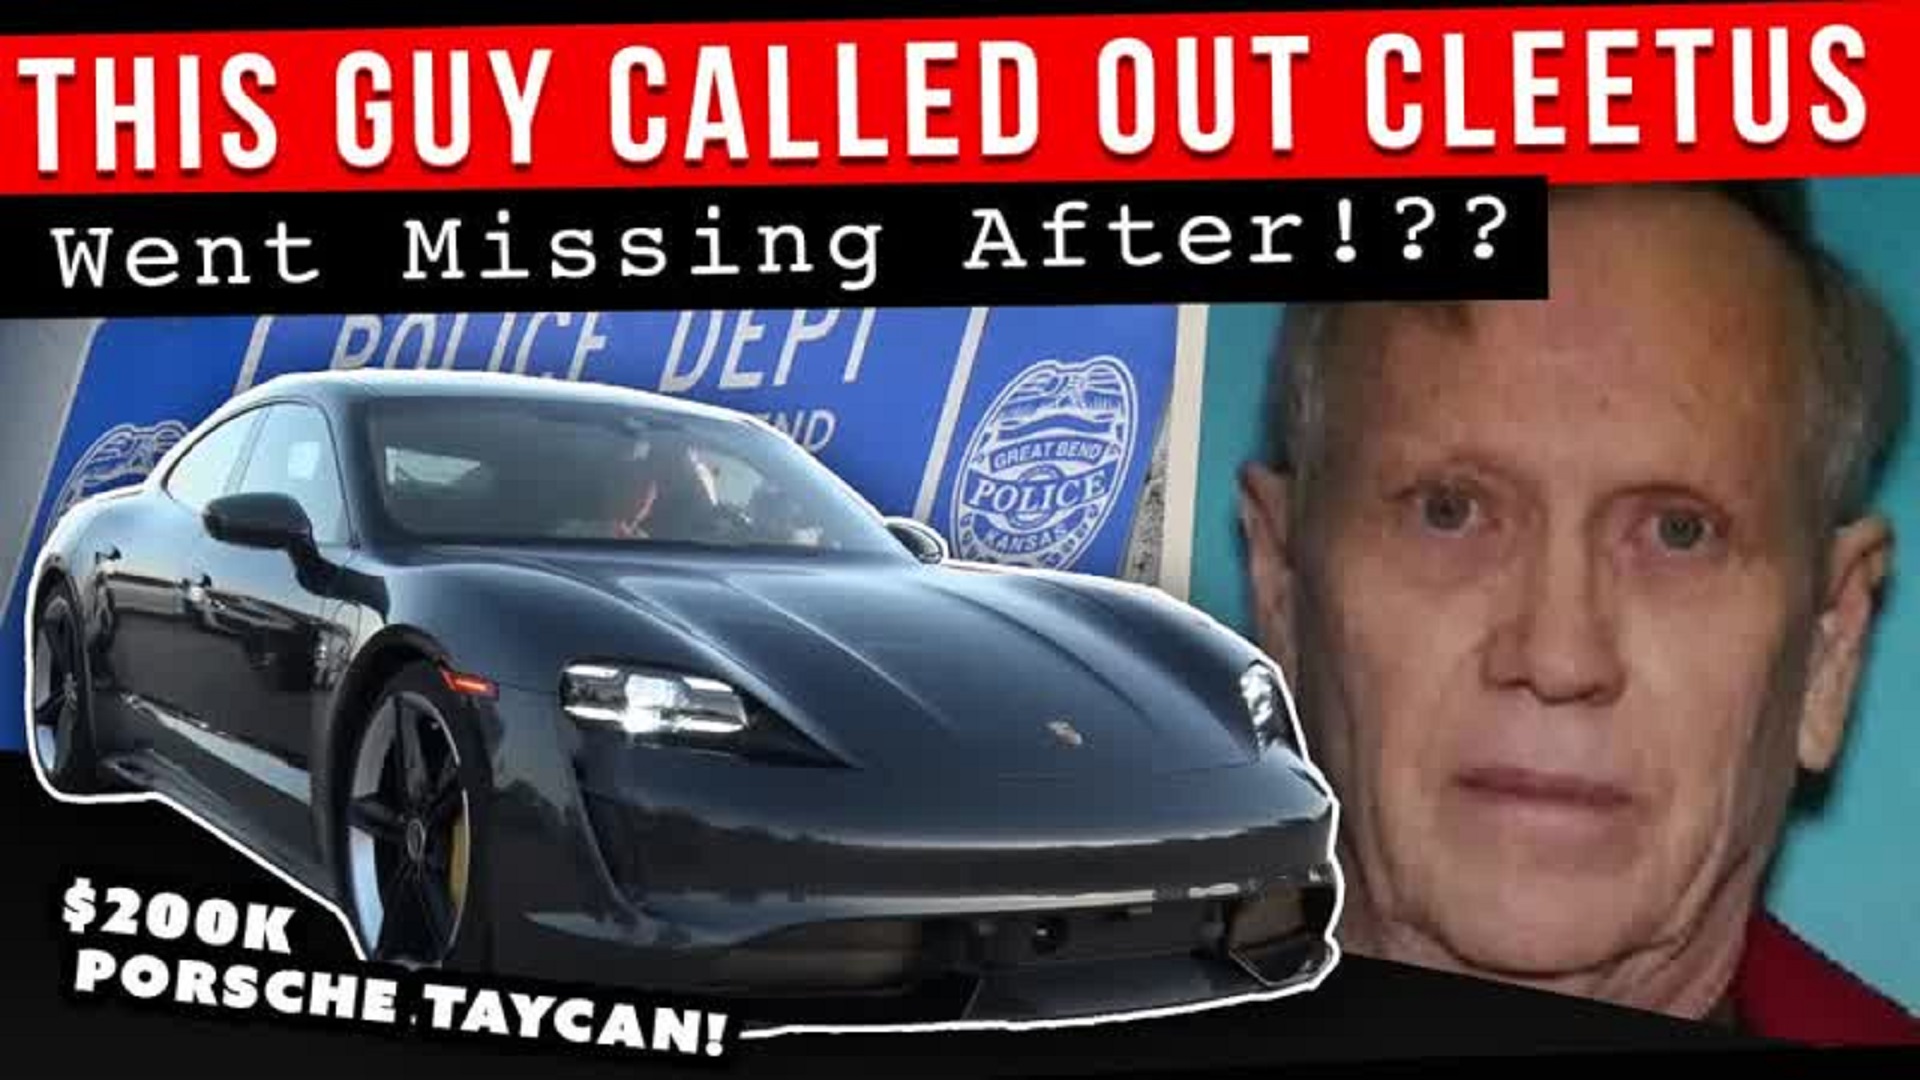 What Happened that “CRAZY GUY” in the Porsche Taycan that Called Out Cleetus to a Drag Race?!